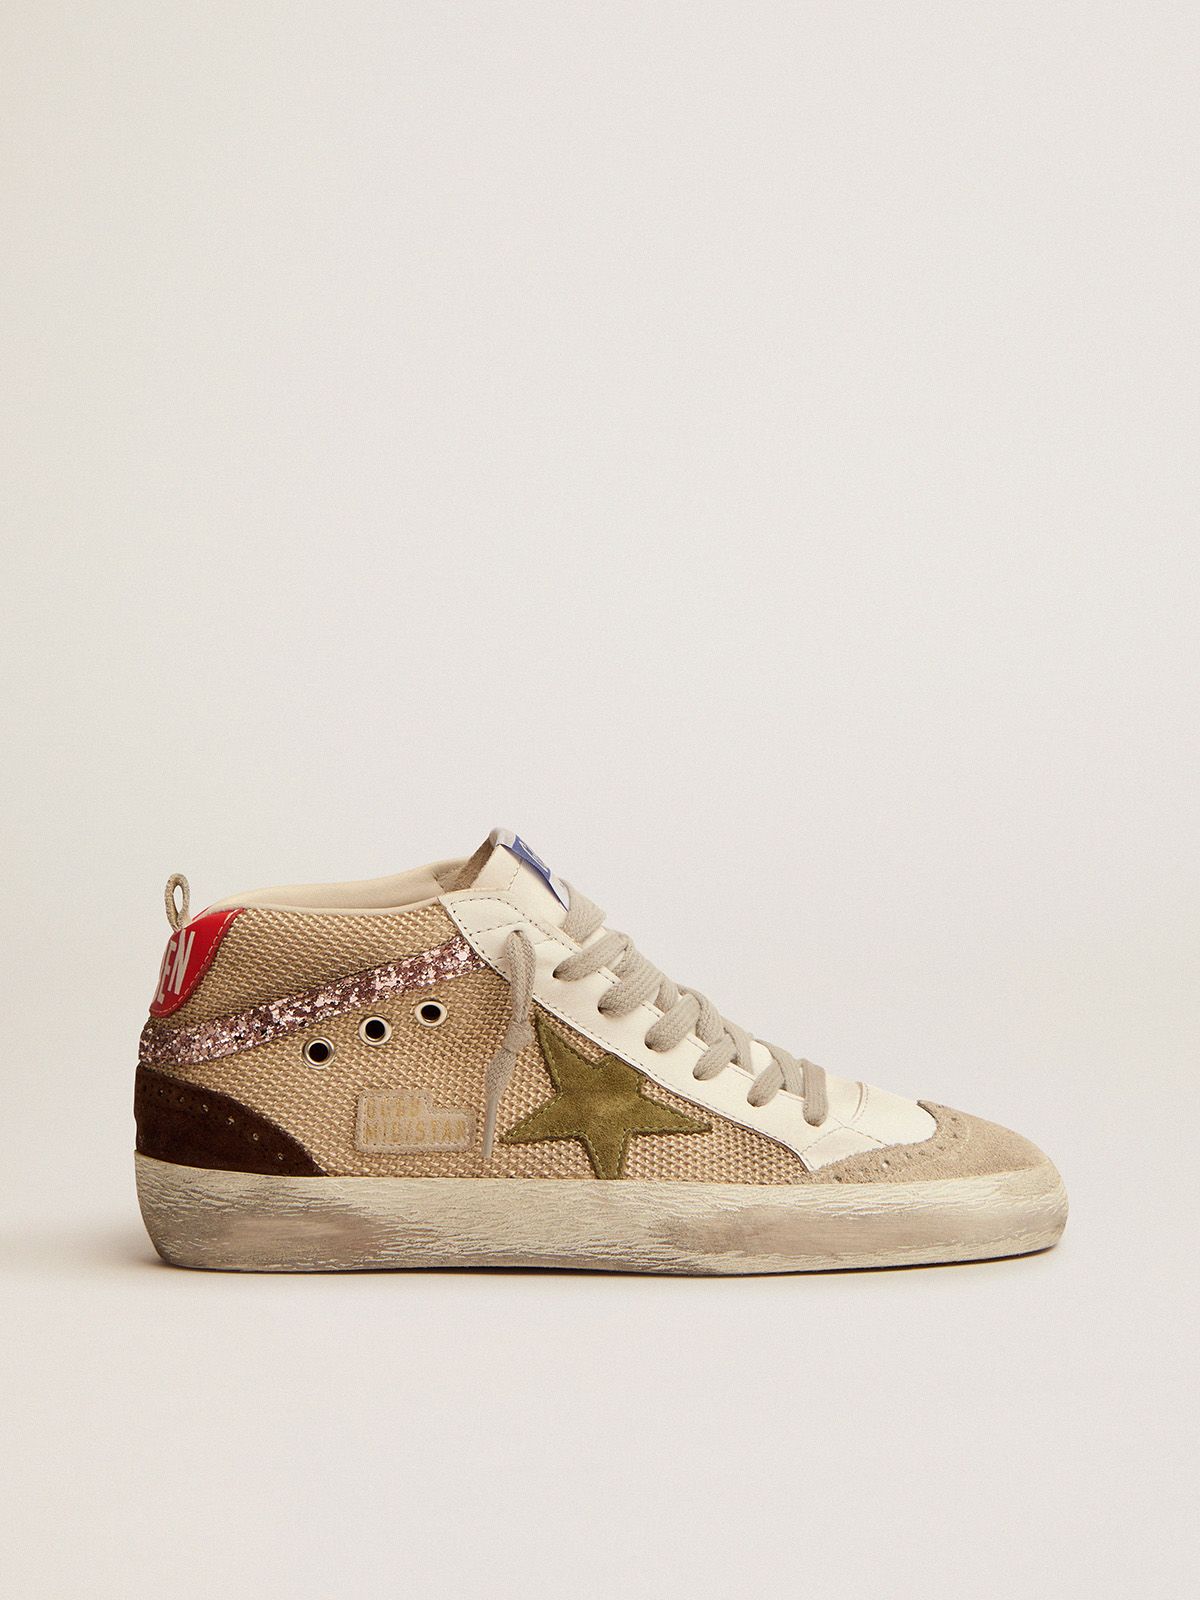 Mid Star sneakers in cream-colored mesh with suede and glitter details | 